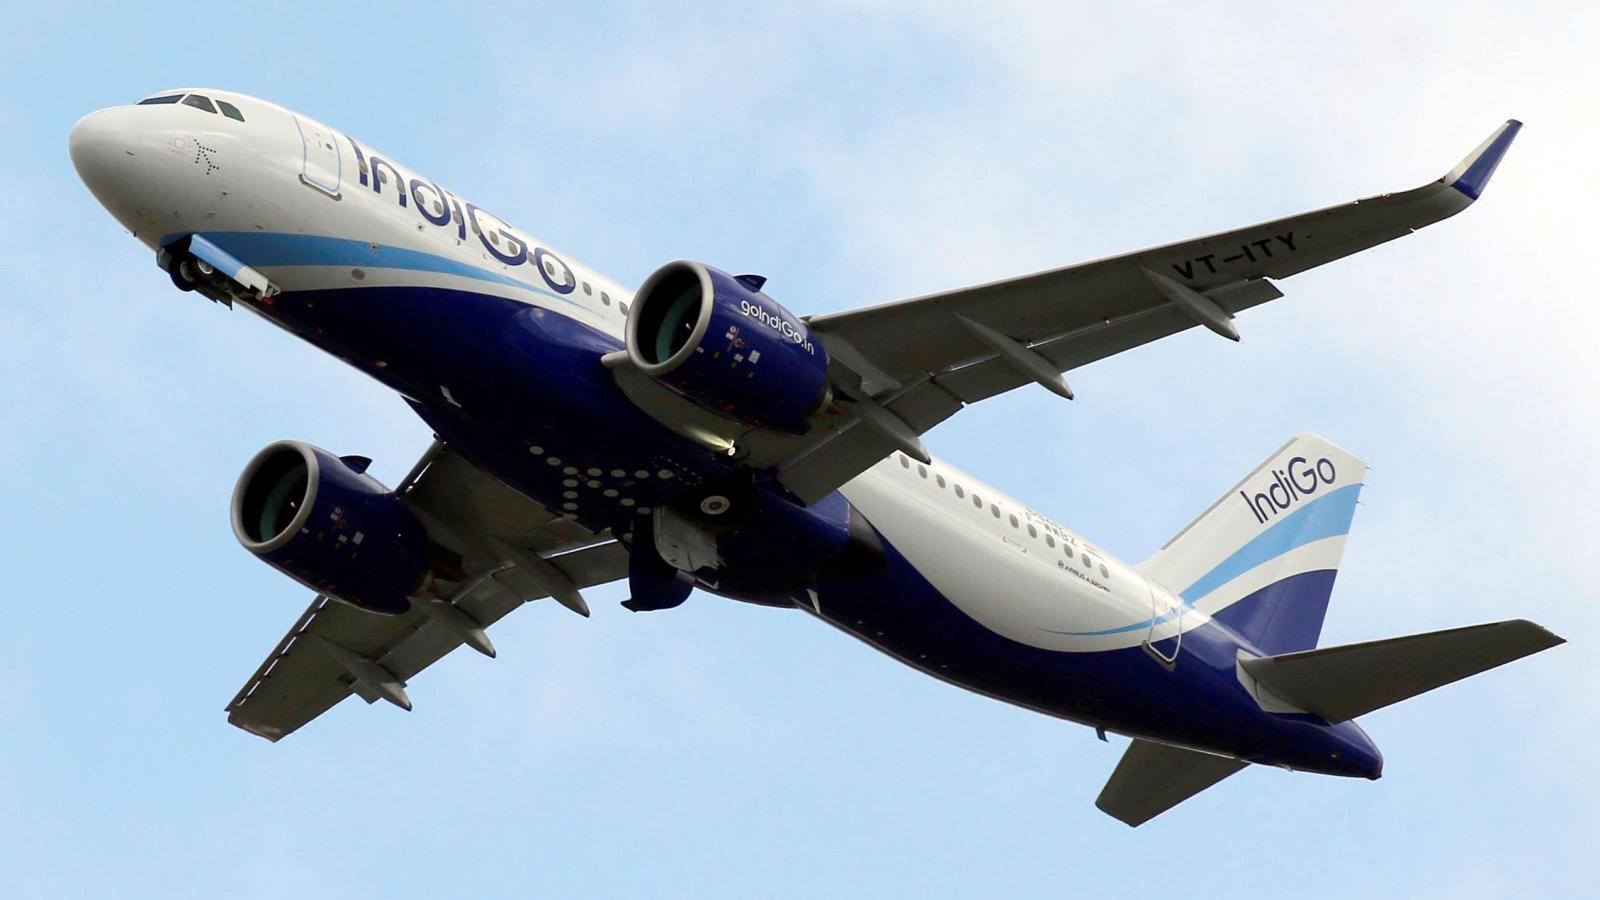 Indigo results for Q4 2019 hint at revival even as Jet struggles